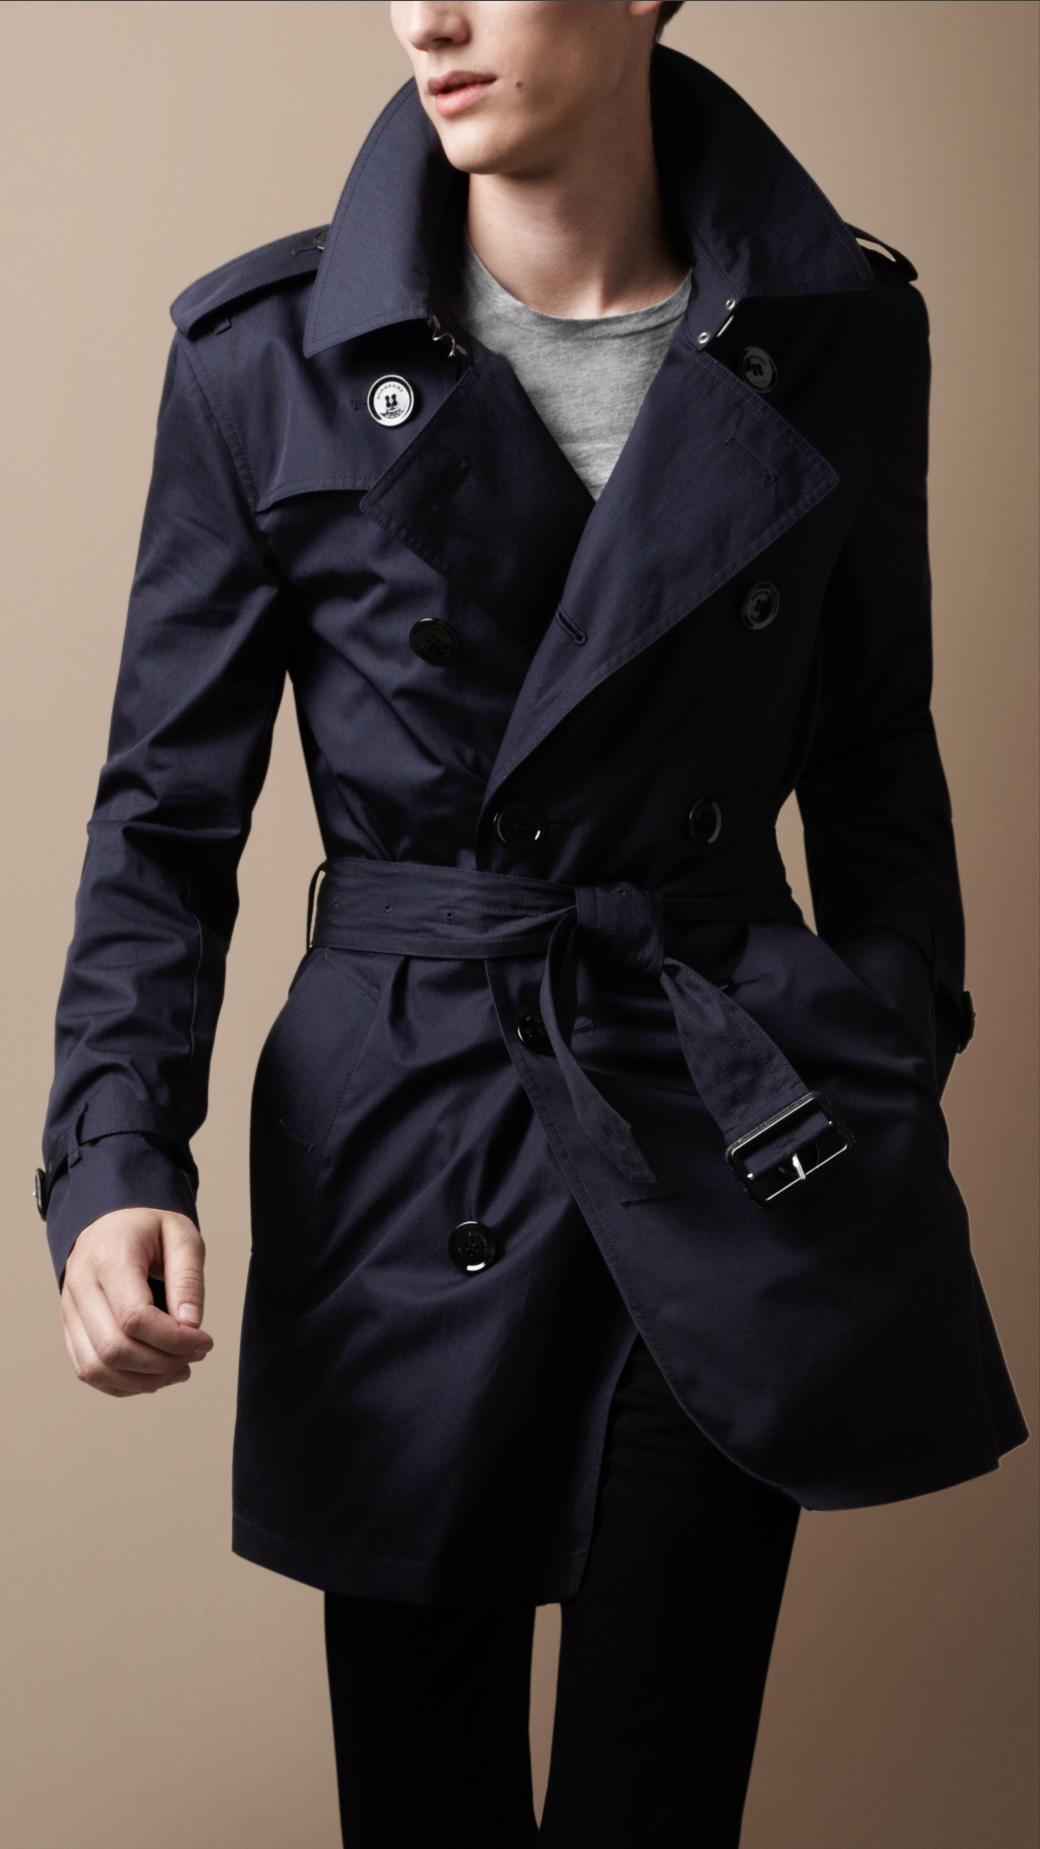 Lyst - Burberry Brit Midlength Cotton Trench Coat in Blue for Men